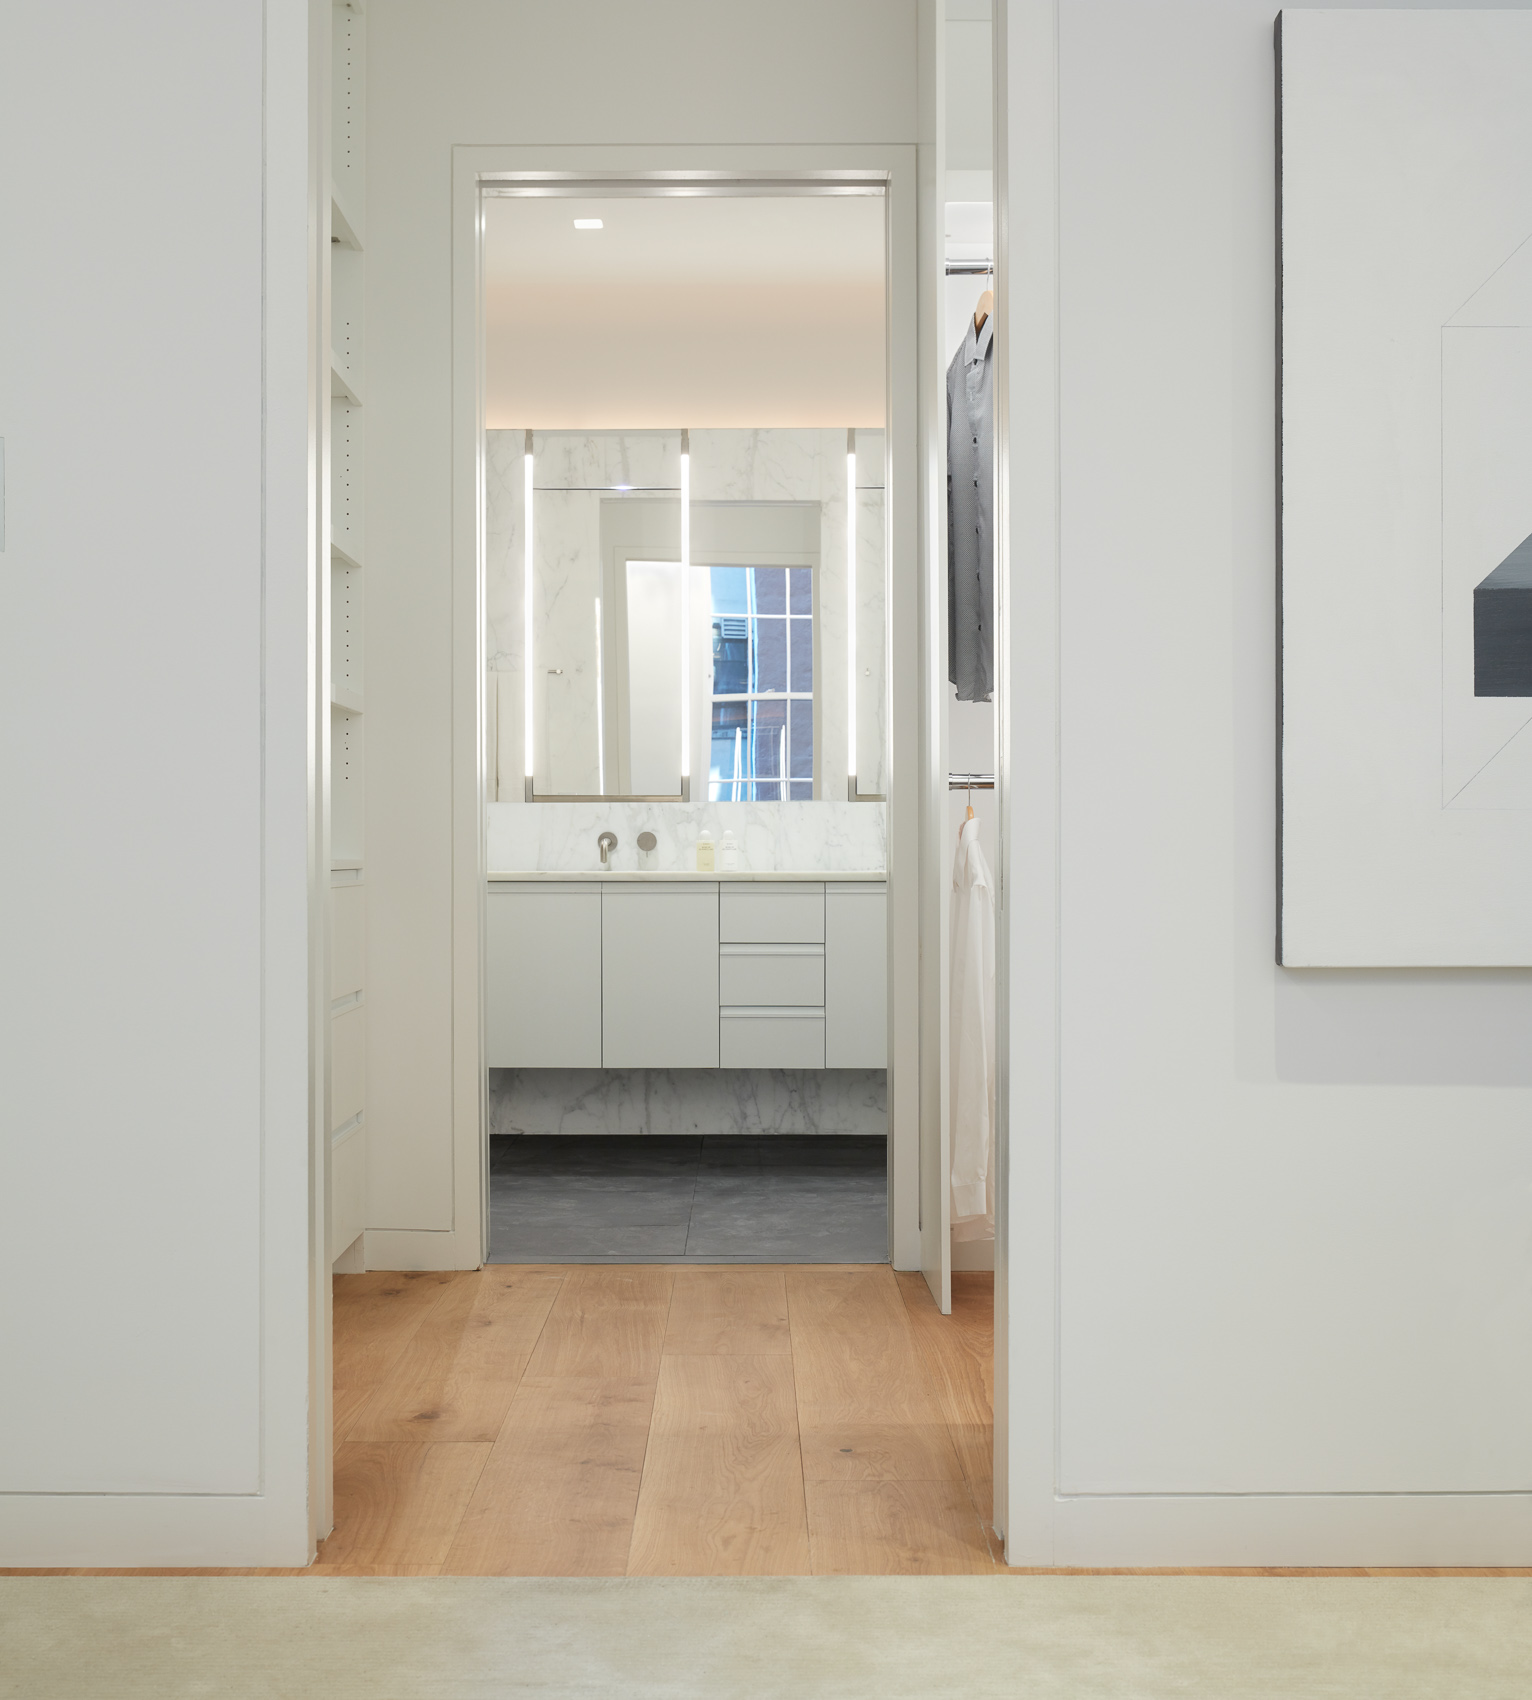 Doorways leading through the closet to a bathroom in a modern luxury apartment